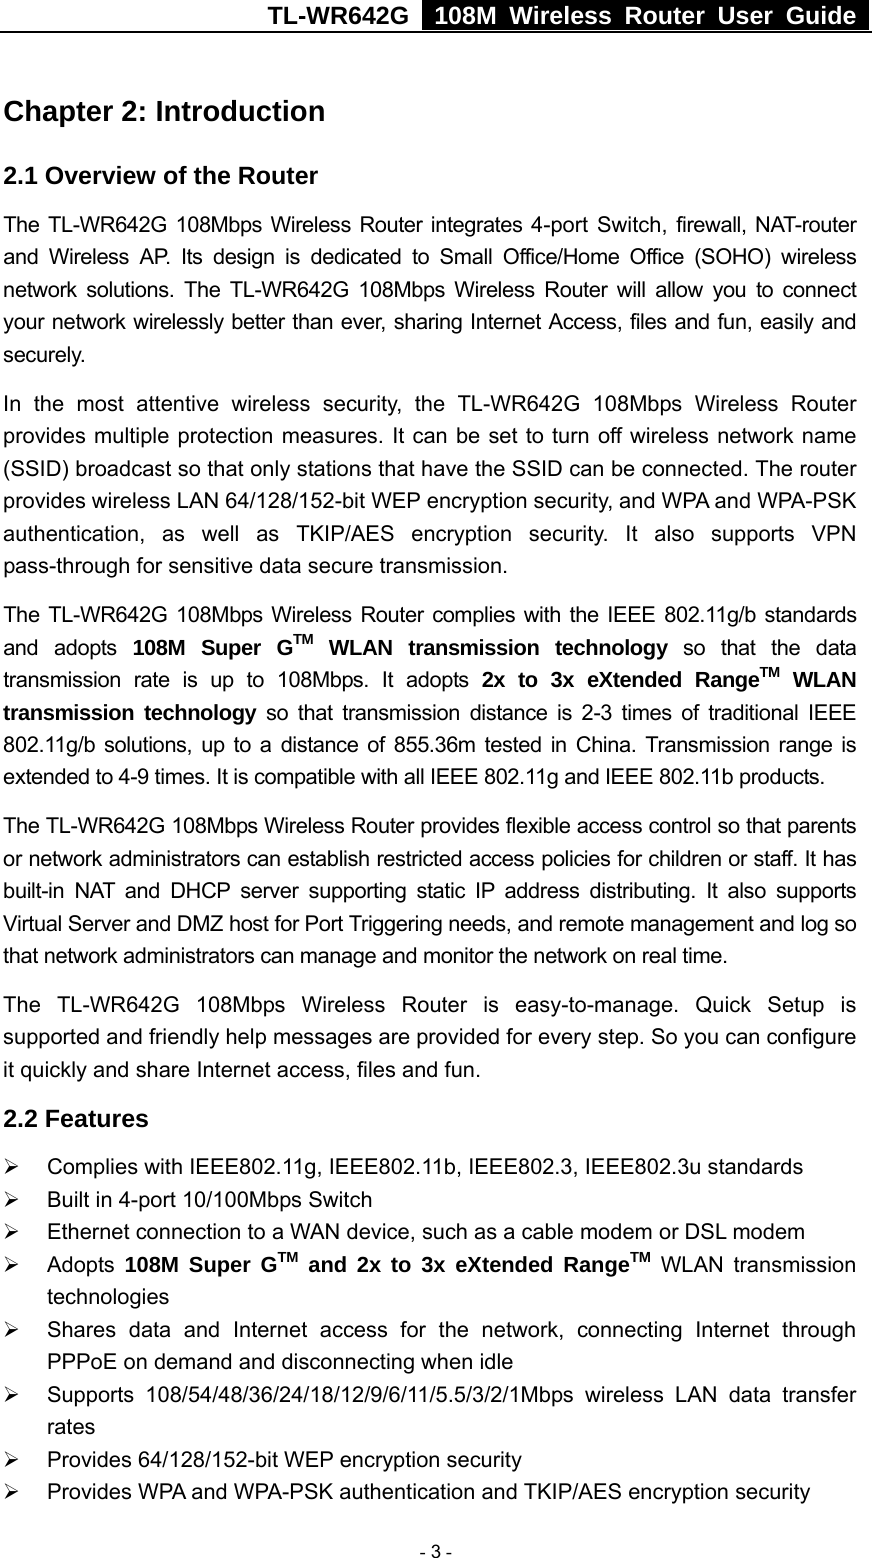 TL-WR642G   108M Wireless Router User Guide   - 3 - Chapter 2: Introduction 2.1 Overview of the Router The TL-WR642G 108Mbps Wireless Router integrates 4-port Switch, firewall, NAT-router and Wireless AP. Its design is dedicated to Small Office/Home Office (SOHO) wireless network solutions. The TL-WR642G 108Mbps Wireless Router will allow you to connect your network wirelessly better than ever, sharing Internet Access, files and fun, easily and securely. In the most attentive wireless security, the TL-WR642G 108Mbps Wireless Router provides multiple protection measures. It can be set to turn off wireless network name (SSID) broadcast so that only stations that have the SSID can be connected. The router provides wireless LAN 64/128/152-bit WEP encryption security, and WPA and WPA-PSK authentication, as well as TKIP/AES encryption security. It also supports VPN pass-through for sensitive data secure transmission. The TL-WR642G 108Mbps Wireless Router complies with the IEEE 802.11g/b standards and adopts 108M Super GTM WLAN transmission technology so that the data transmission rate is up to 108Mbps. It adopts 2x to 3x eXtended RangeTM WLAN transmission technology so that transmission distance is 2-3 times of traditional IEEE 802.11g/b solutions, up to a distance of 855.36m tested in China. Transmission range is extended to 4-9 times. It is compatible with all IEEE 802.11g and IEEE 802.11b products. The TL-WR642G 108Mbps Wireless Router provides flexible access control so that parents or network administrators can establish restricted access policies for children or staff. It has built-in NAT and DHCP server supporting static IP address distributing. It also supports Virtual Server and DMZ host for Port Triggering needs, and remote management and log so that network administrators can manage and monitor the network on real time.   The TL-WR642G 108Mbps Wireless Router is easy-to-manage. Quick Setup is supported and friendly help messages are provided for every step. So you can configure it quickly and share Internet access, files and fun. 2.2 Features ¾  Complies with IEEE802.11g, IEEE802.11b, IEEE802.3, IEEE802.3u standards ¾  Built in 4-port 10/100Mbps Switch ¾  Ethernet connection to a WAN device, such as a cable modem or DSL modem ¾ Adopts 108M Super GTM and 2x to 3x eXtended RangeTM WLAN transmission technologies ¾  Shares data and Internet access for the network, connecting Internet through PPPoE on demand and disconnecting when idle ¾ Supports 108/54/48/36/24/18/12/9/6/11/5.5/3/2/1Mbps wireless LAN data transfer rates ¾  Provides 64/128/152-bit WEP encryption security ¾  Provides WPA and WPA-PSK authentication and TKIP/AES encryption security 